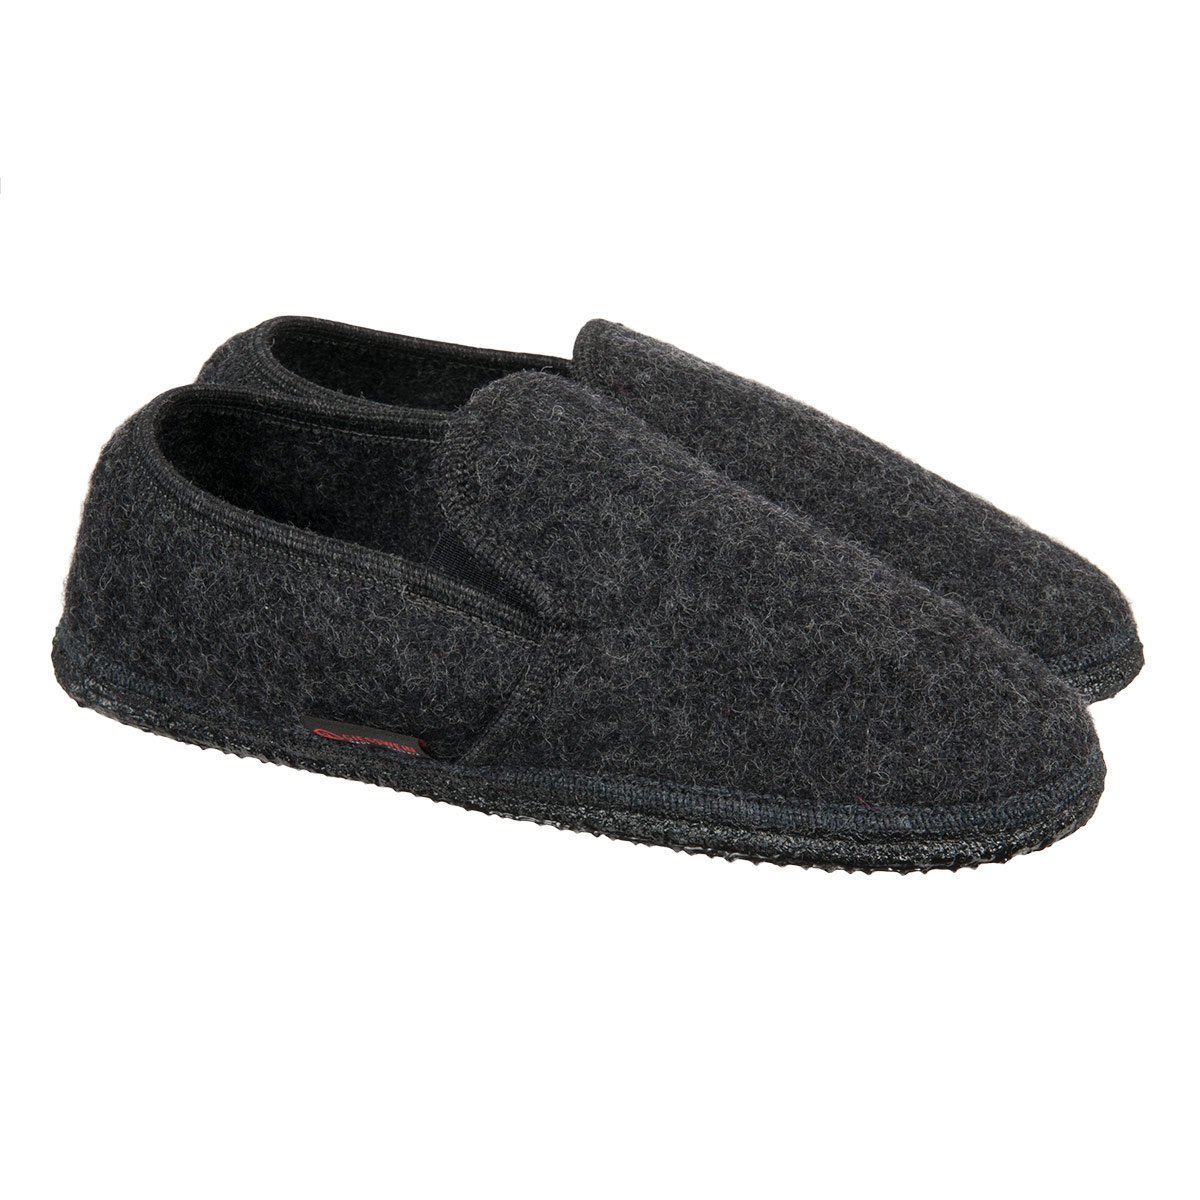 slippers with non-slip soles model by Giesswein